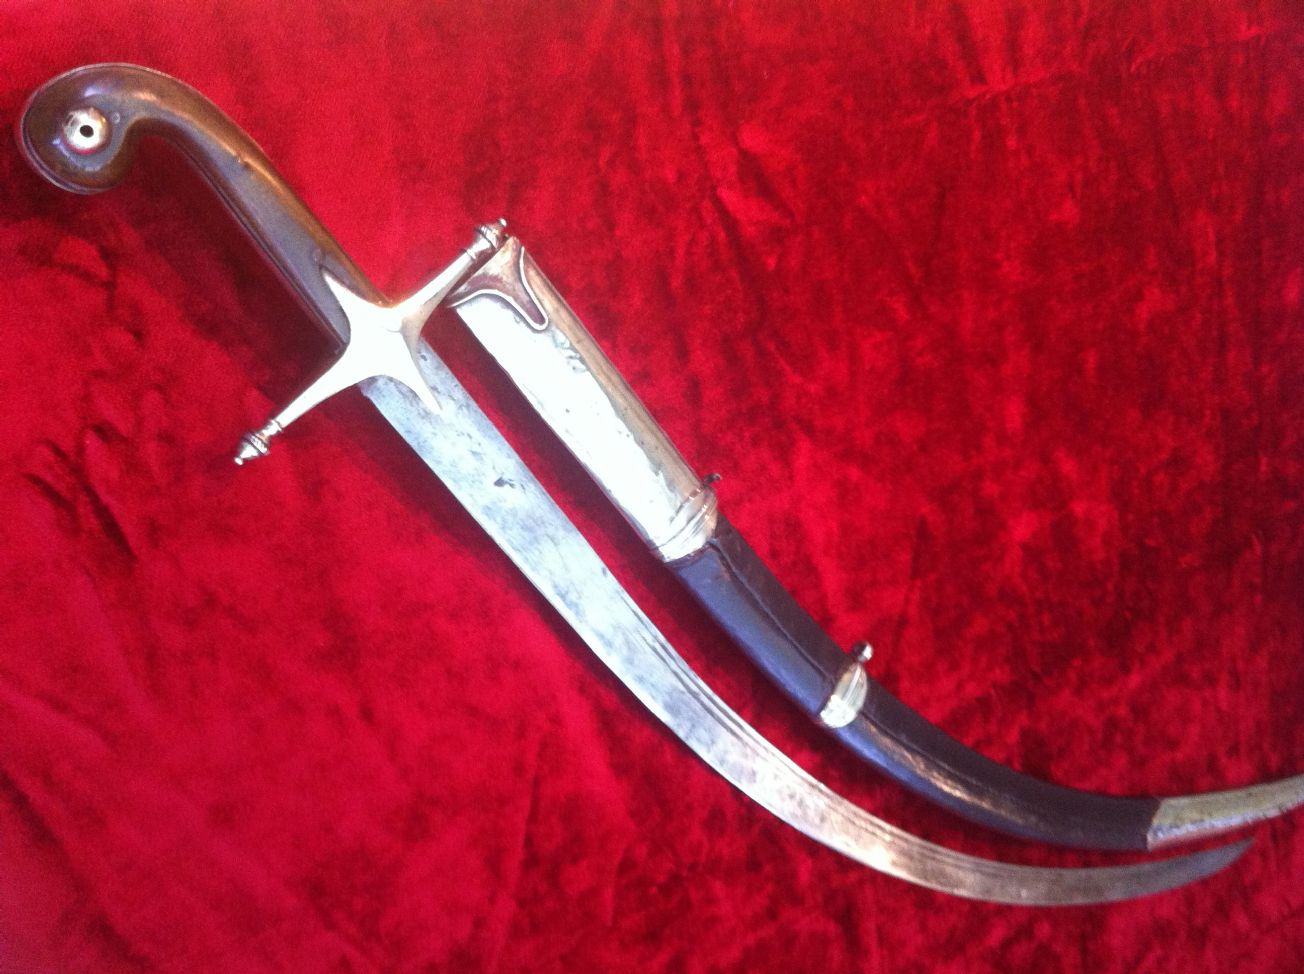 x-x-x-sold-x-x-x-silver-metal-mounted-turkish-shamshir-sword-with-matching-leather-scabbard.-very-good-condition.-ref-6613.-%5B3%5D-185-p.jpg